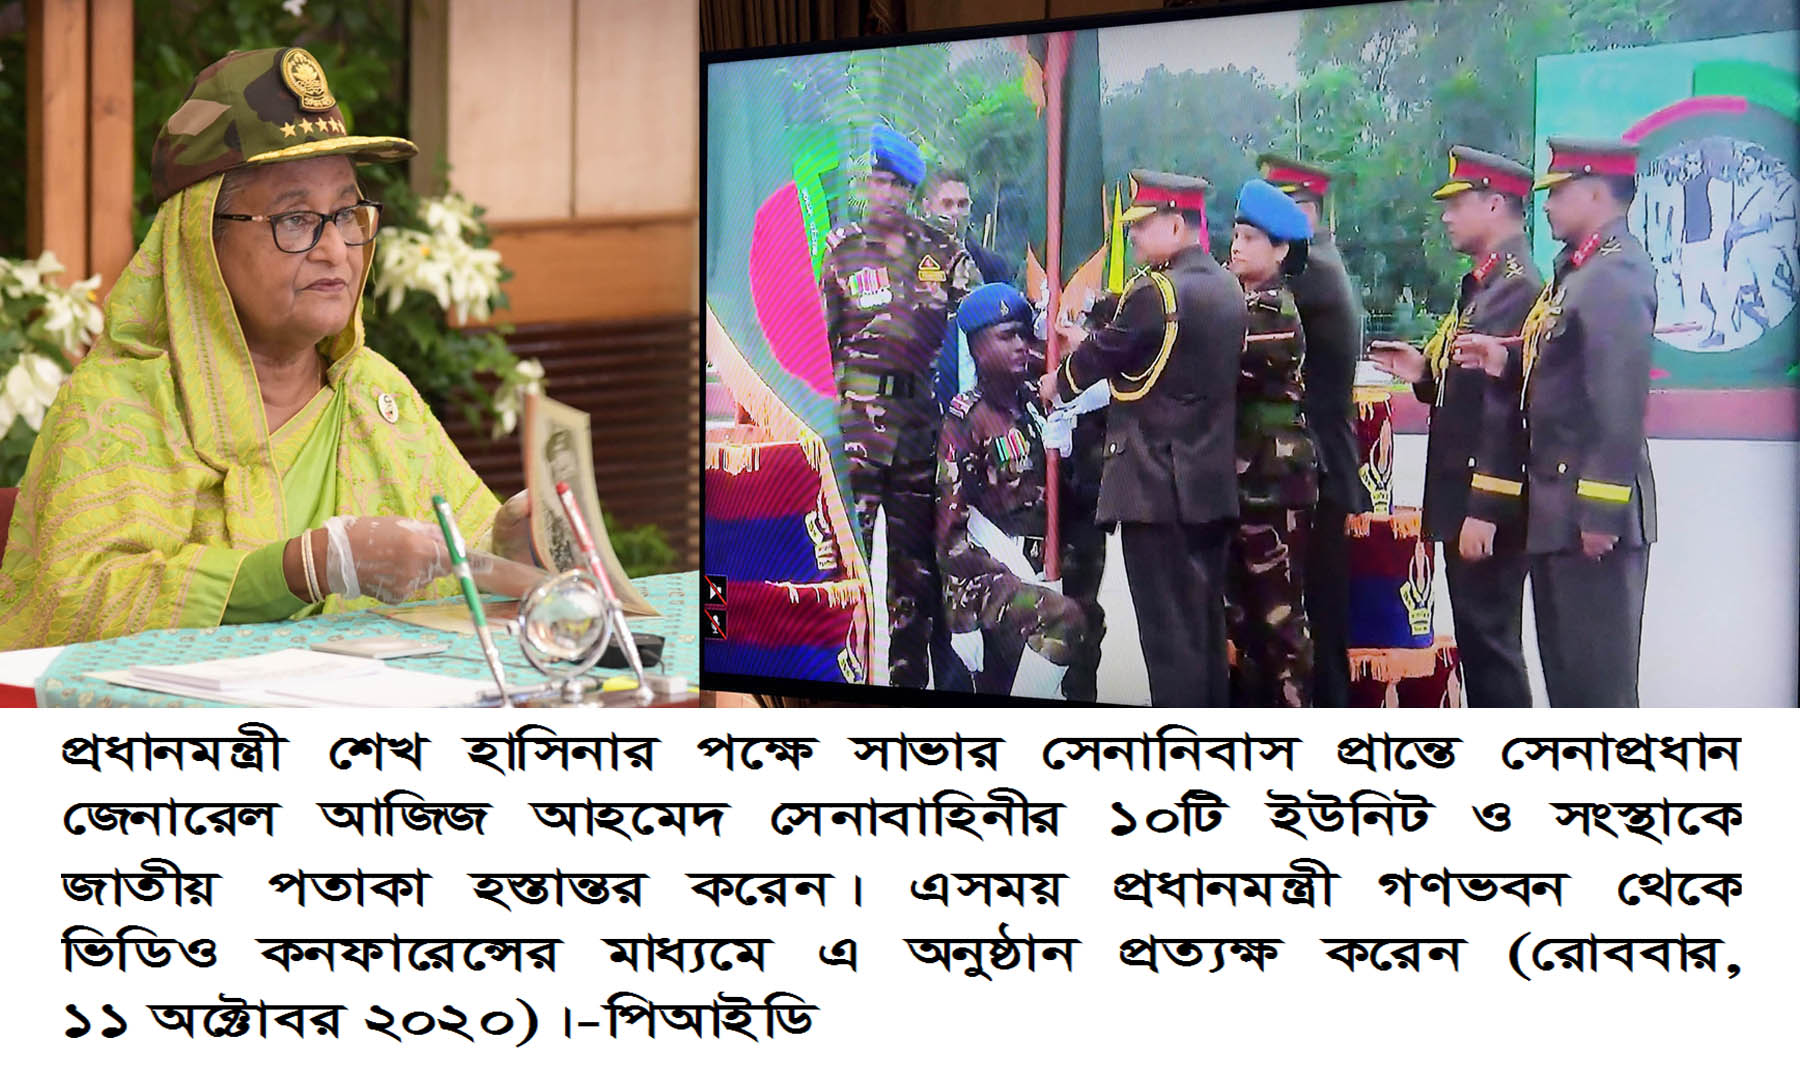 Sheikh Hasina participates in Army event via video conference